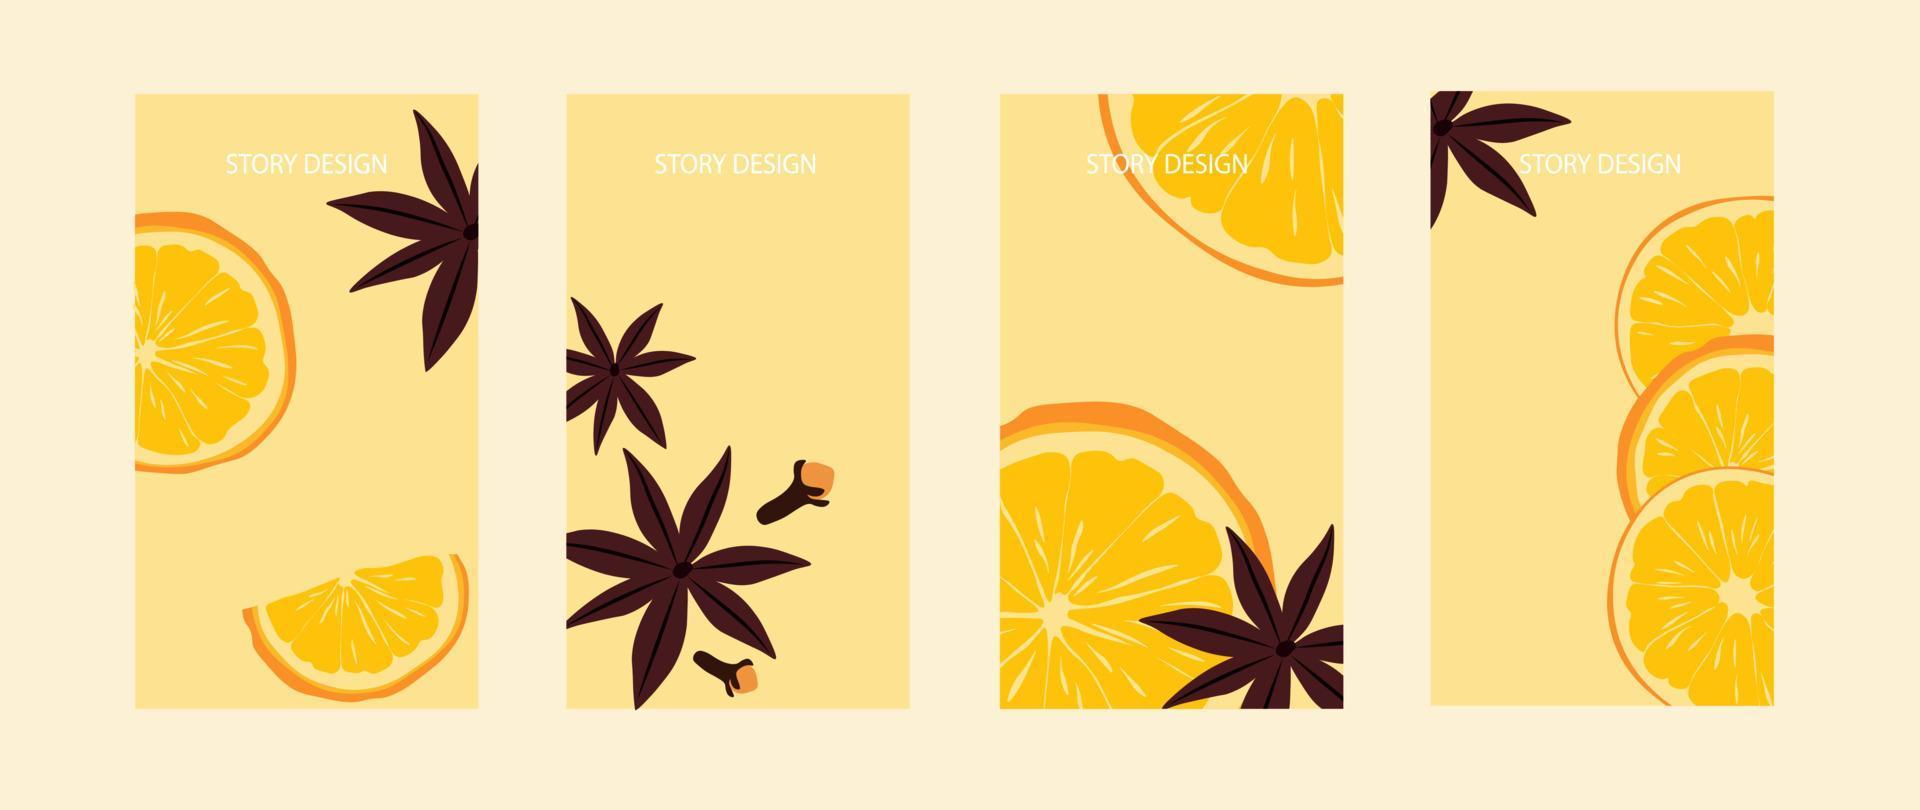 mulled wine story template for social media, orange background with fruit, vector illustration. A slice of orange, cinnamon and cloves.